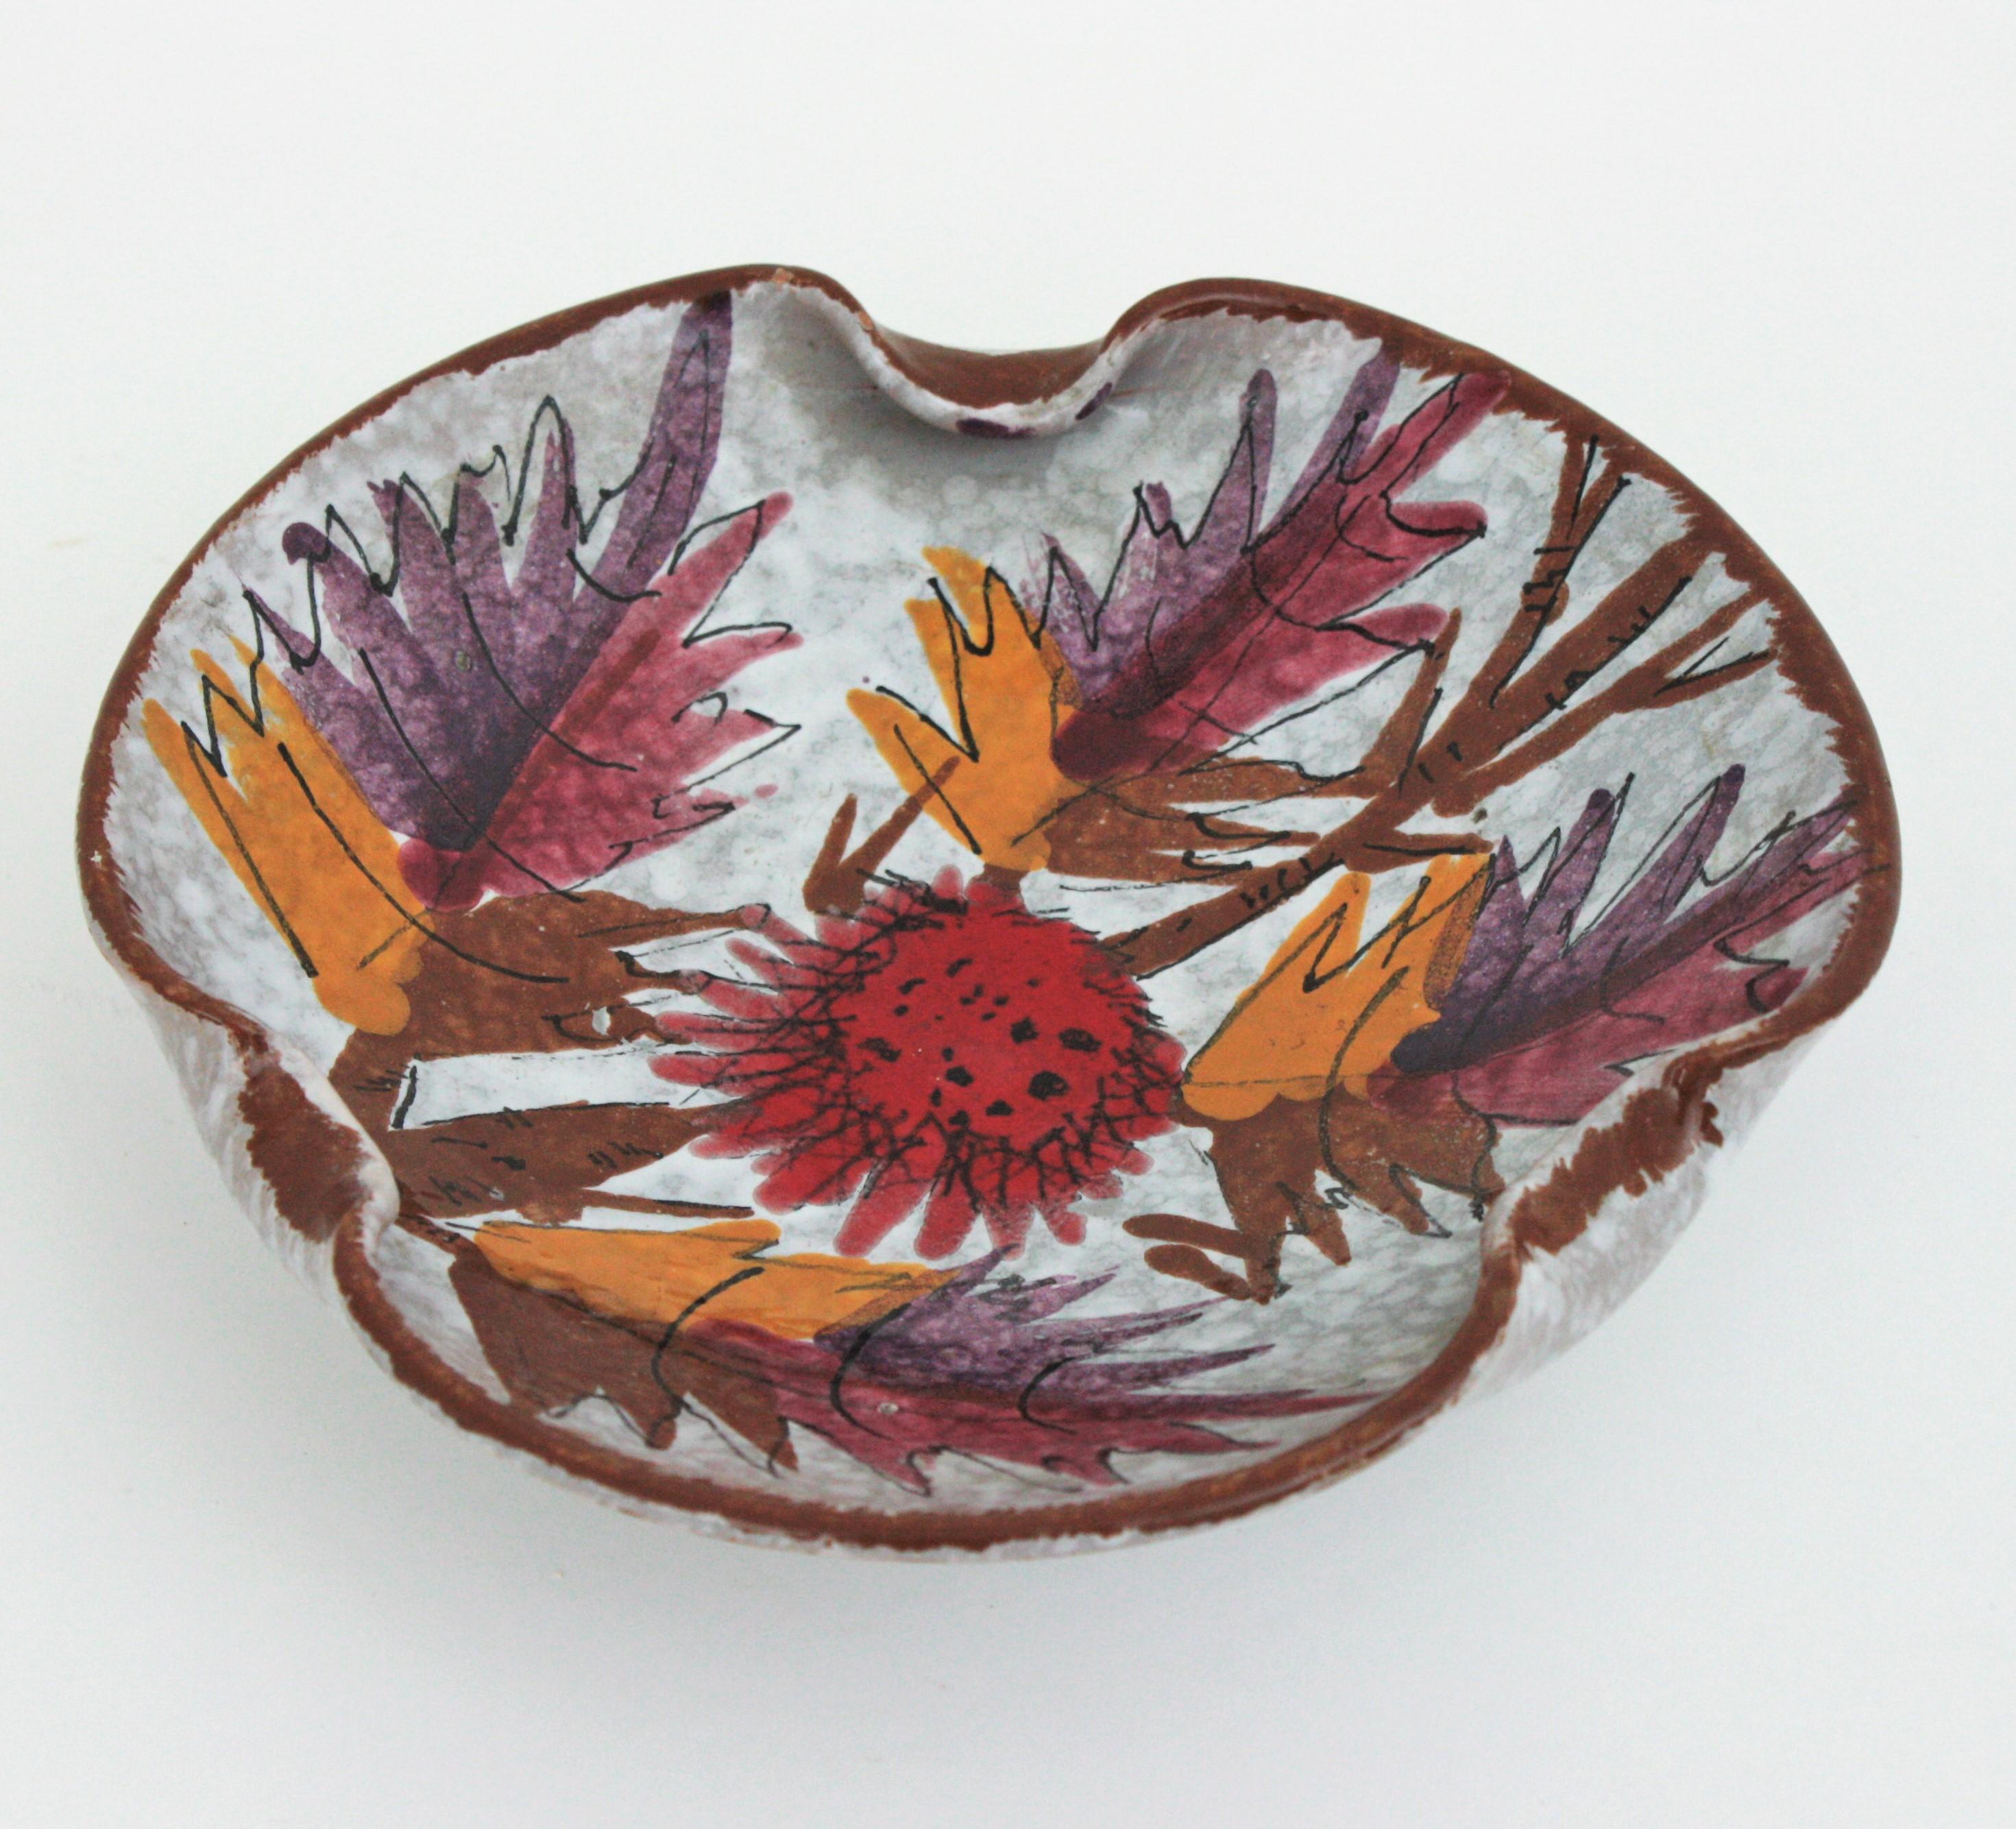 Midcentury Decorative Bowl in Glazed Terracota and Foliage Motif For Sale 2